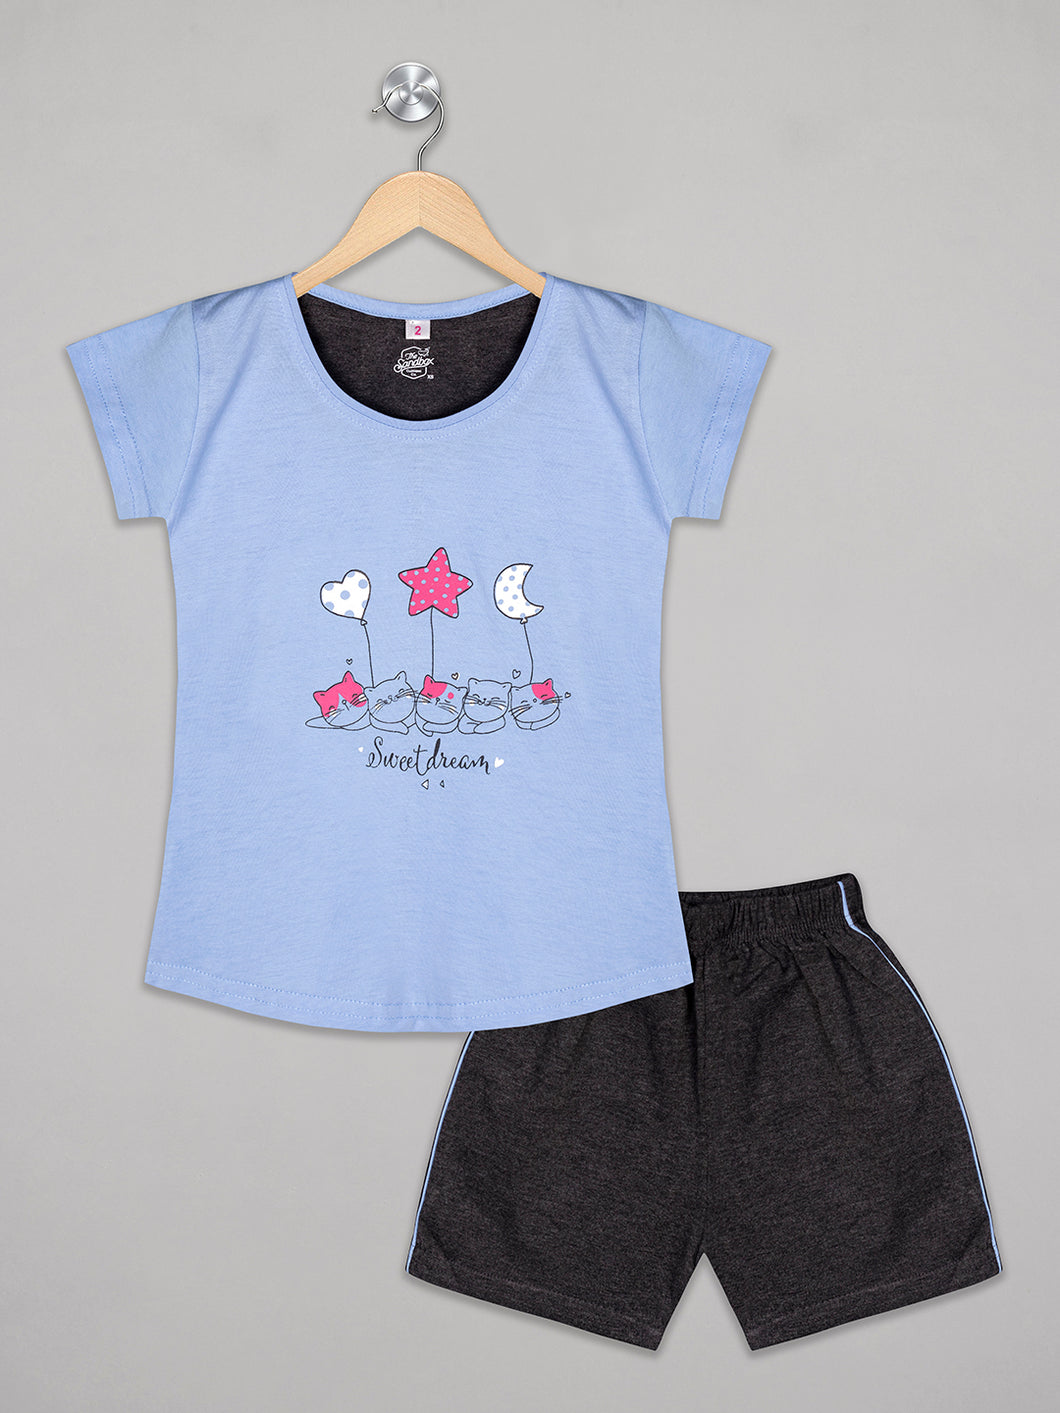 The Sandbox Clothing Co Top and short set 9069